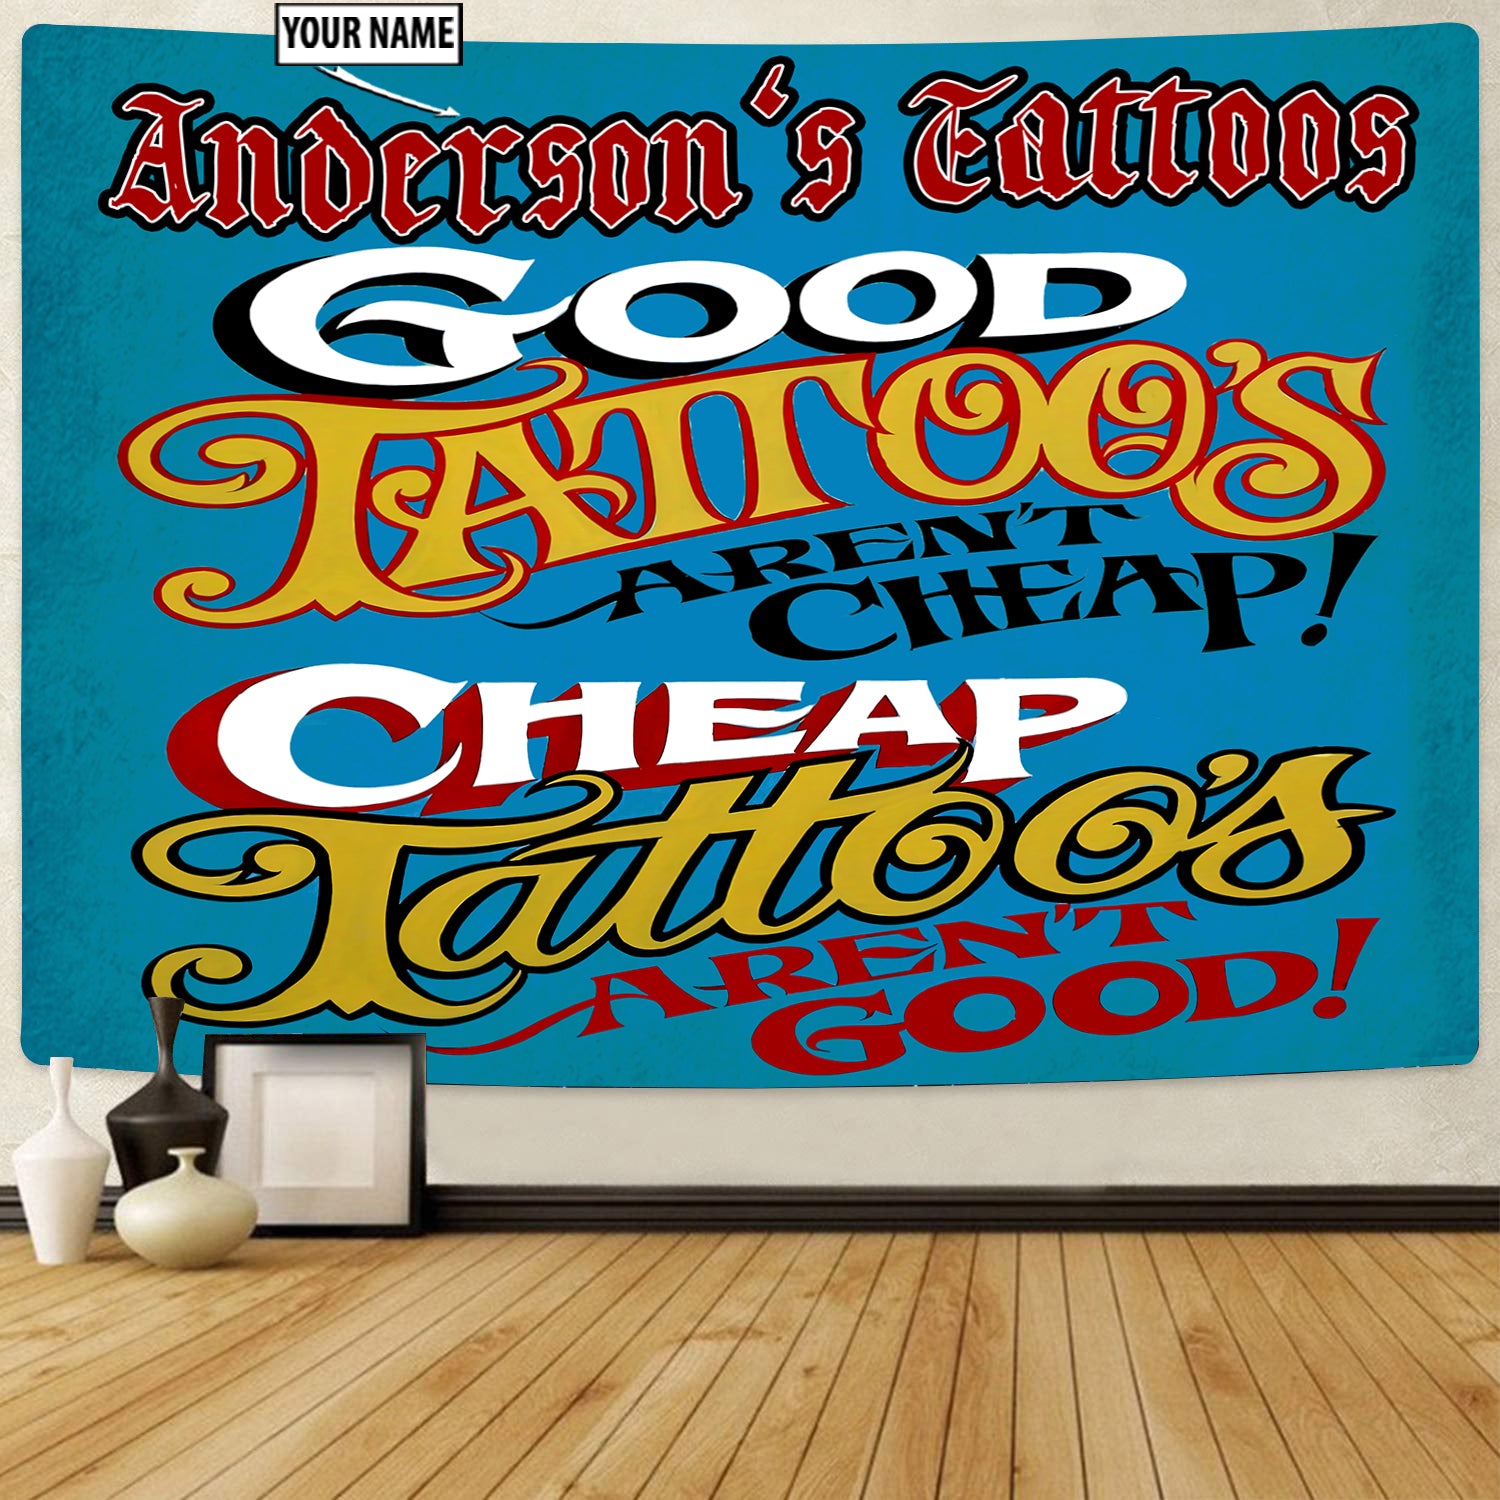 Personalized Tattoos Good Tattoos Aren't Cheap Tapestry 09435